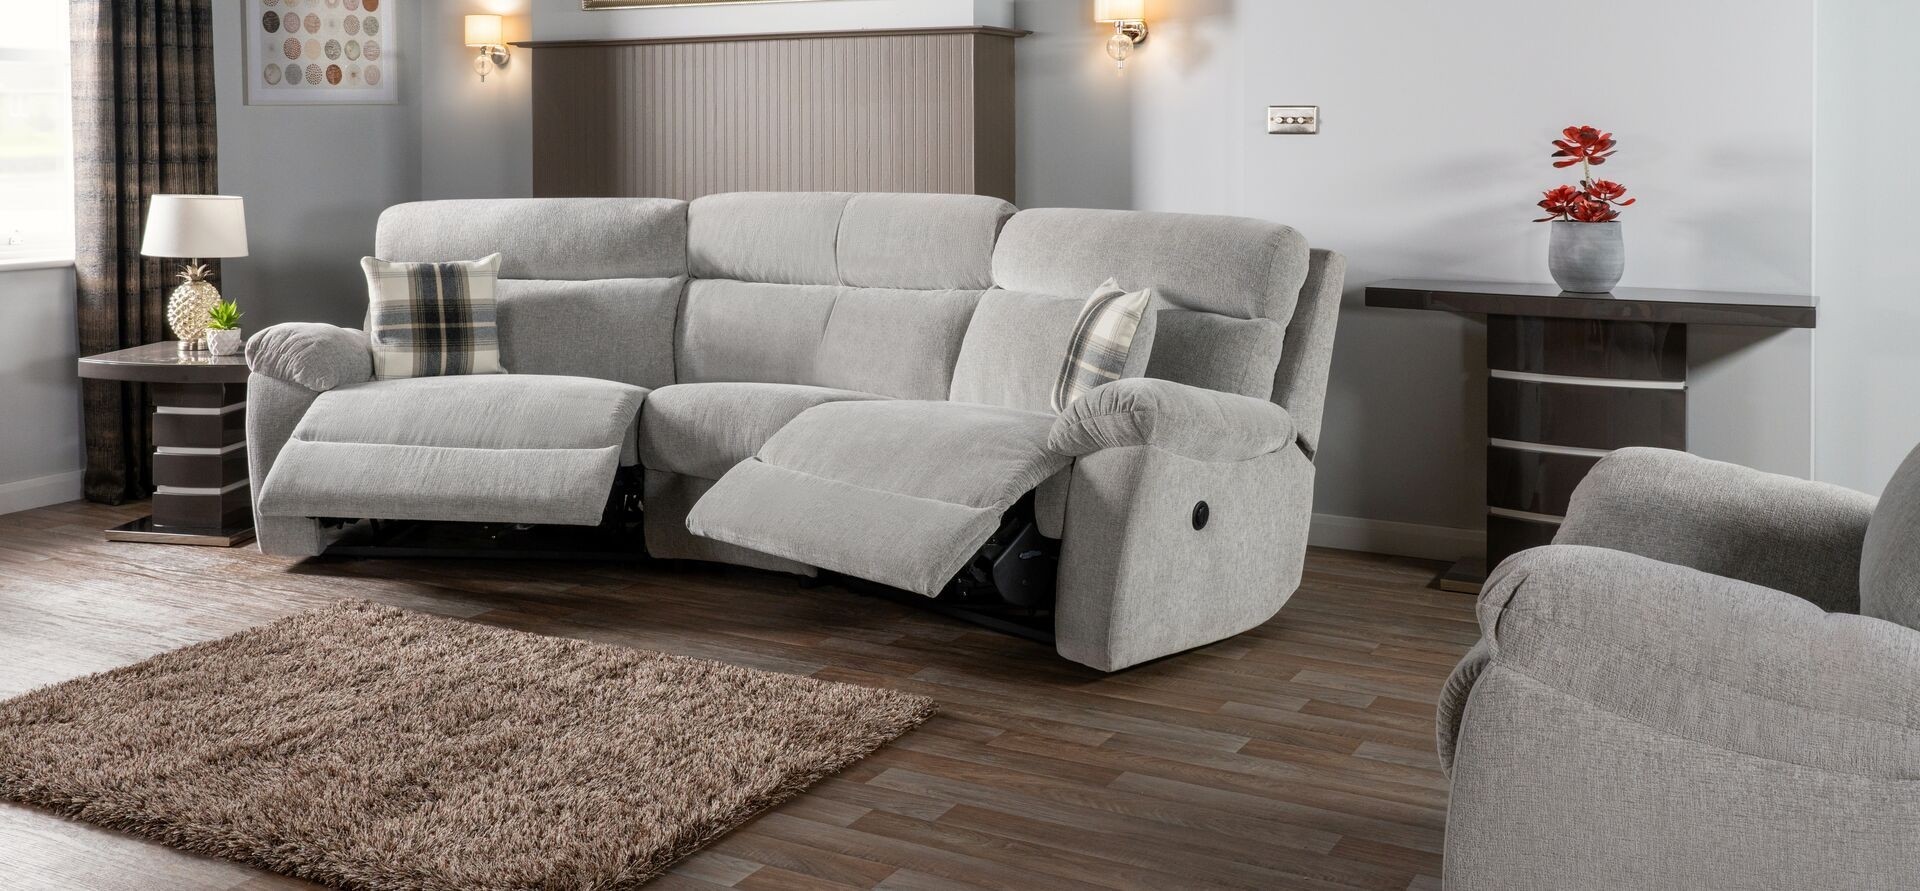 Cloud 4 seater curved power recliner sofa in 2020 beige